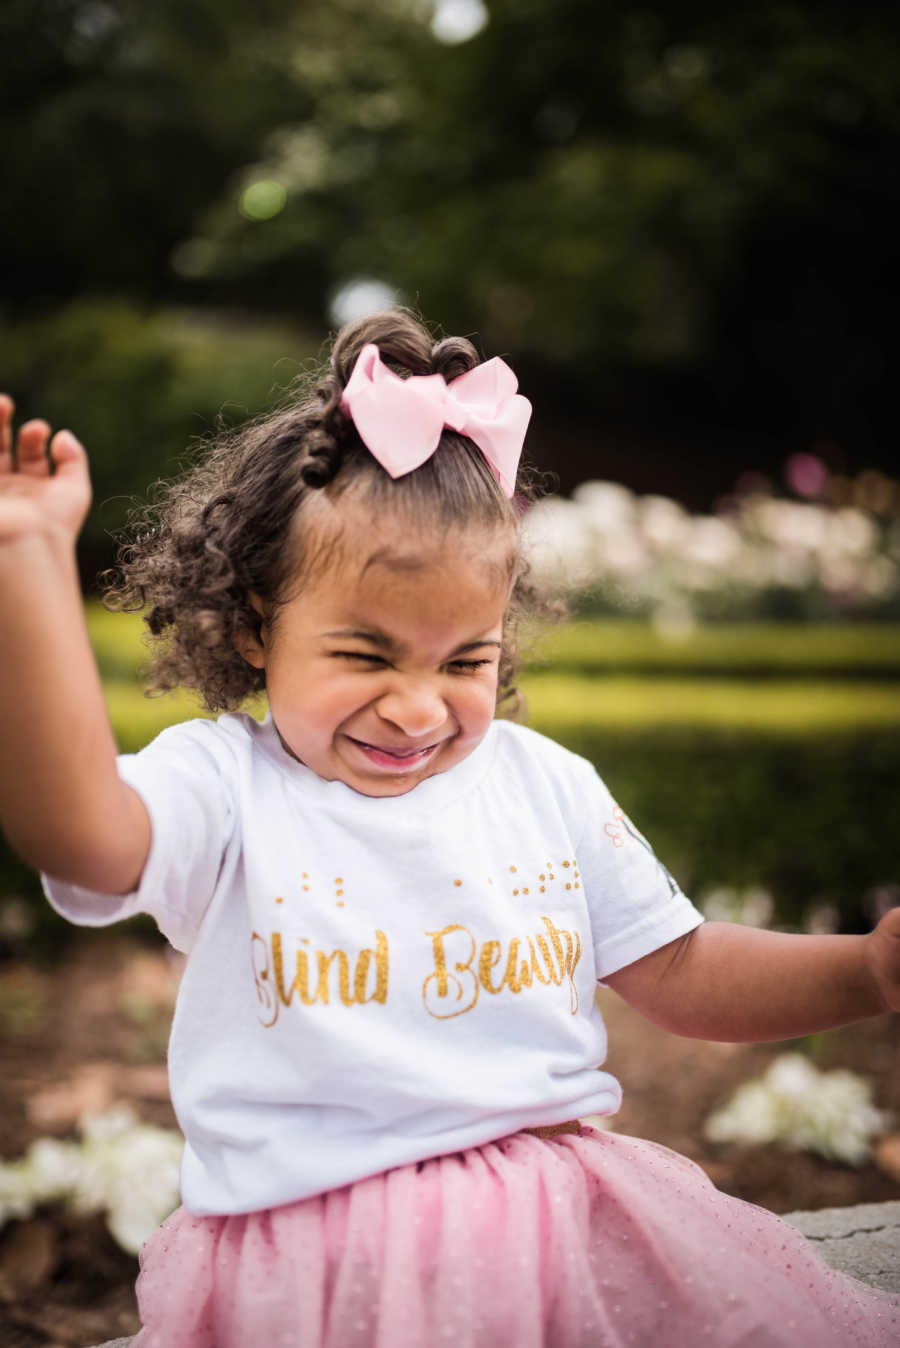 Little girl with prosthetic eyes sits smiling outside with shirt that says, "blind beauty"